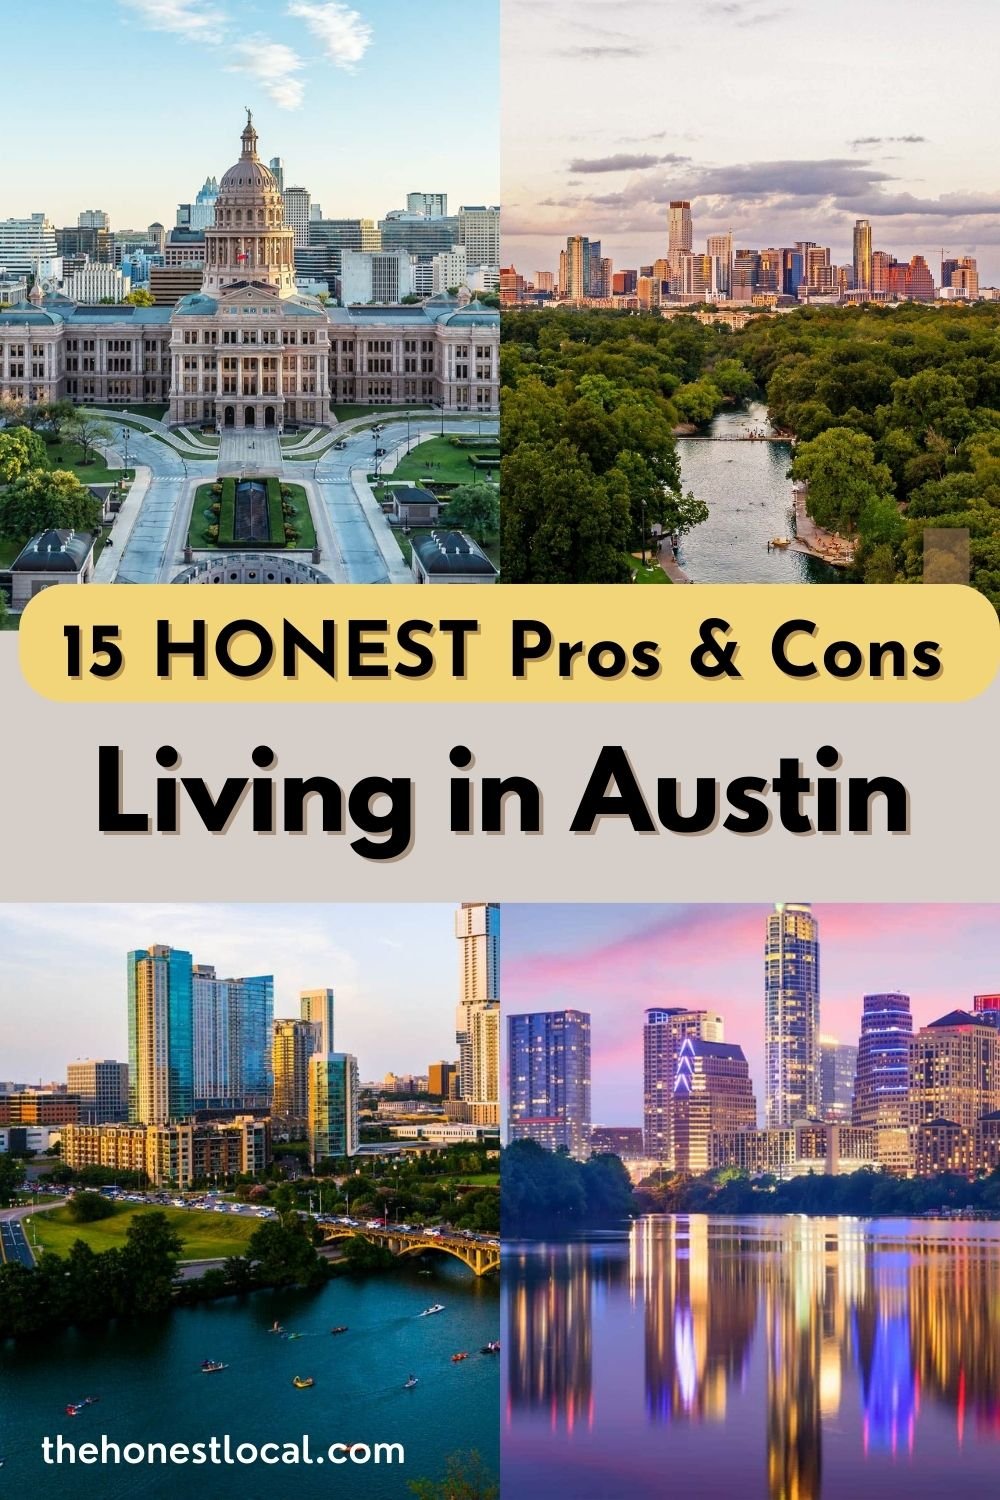 Pros and cons of moving to Austin